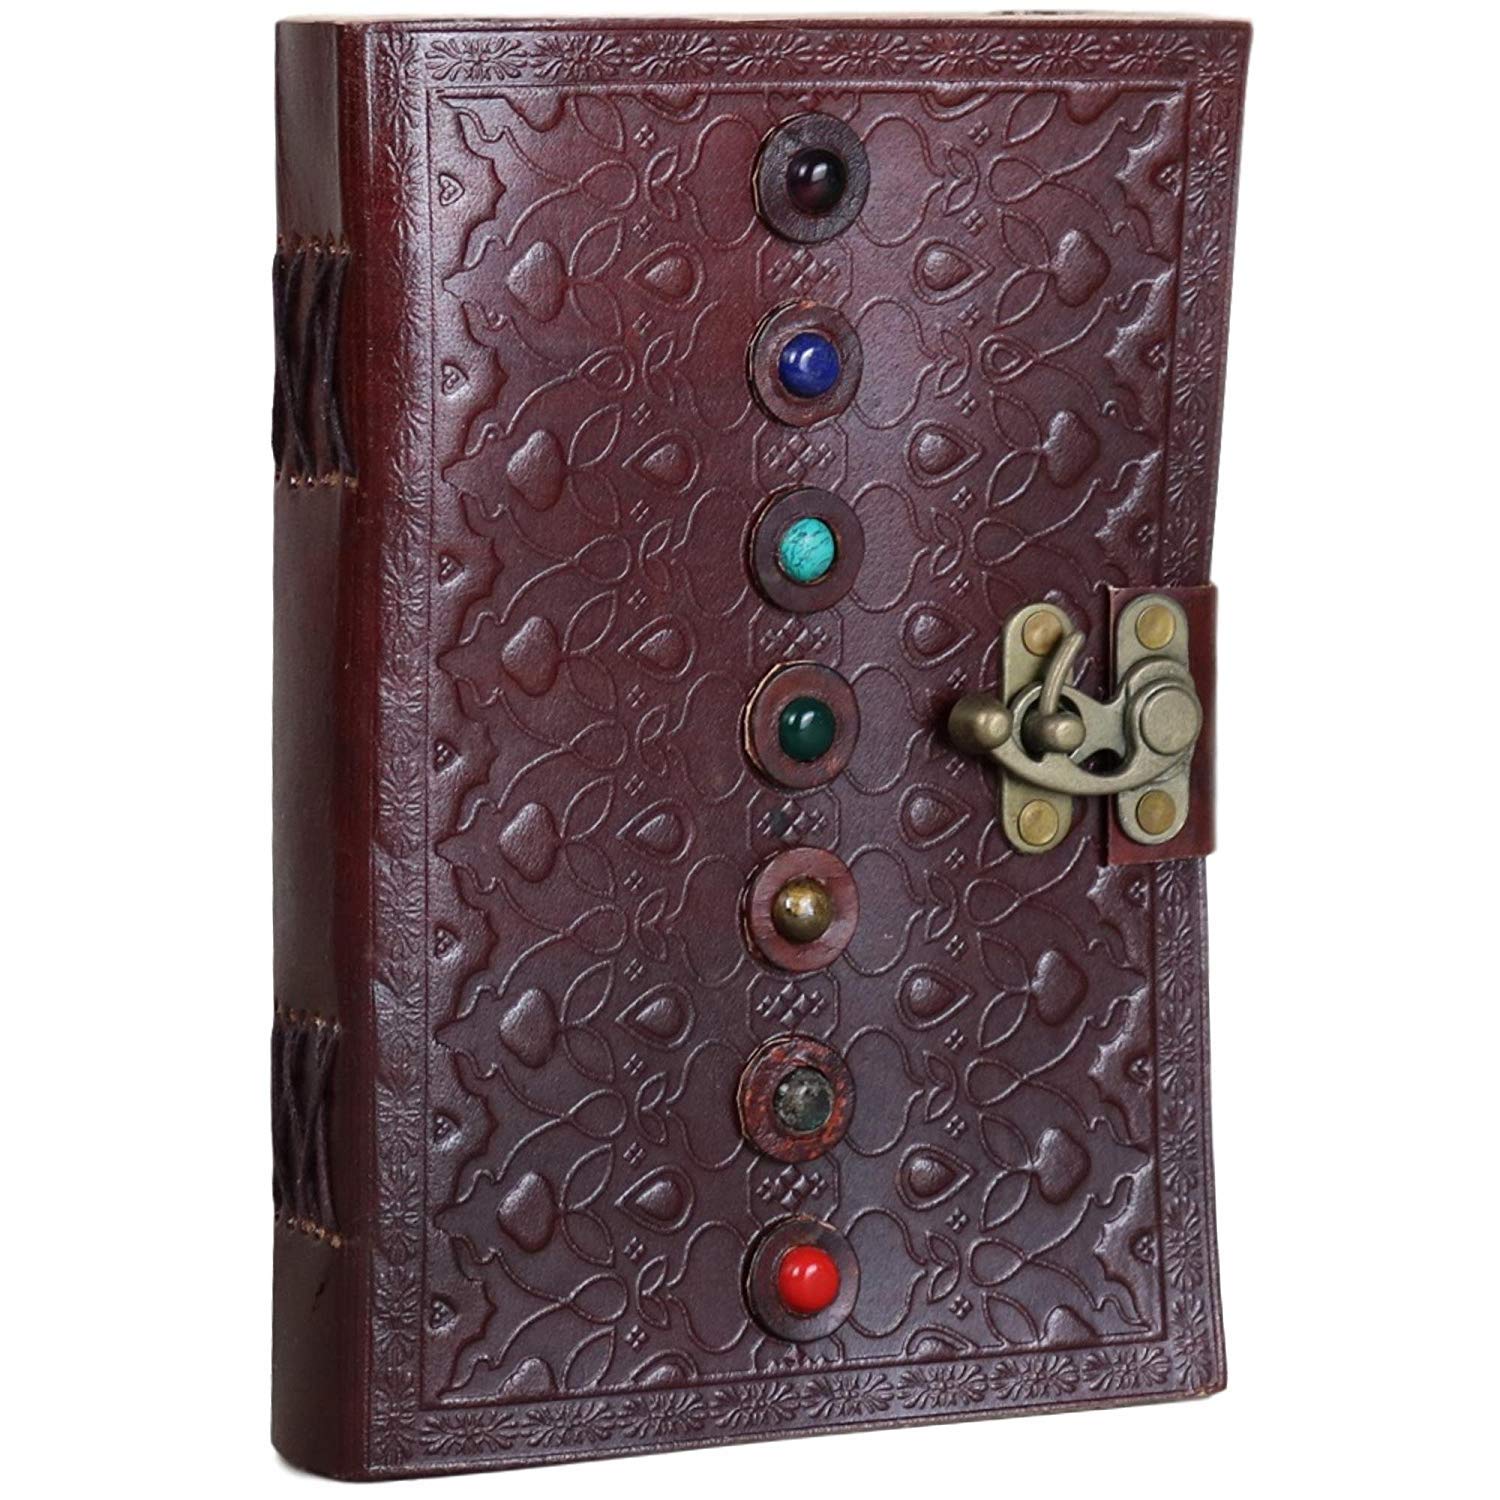 Real Leather 7 Stone Embossed Handmade Diary with Metal Lock (10 x 7 Inch)